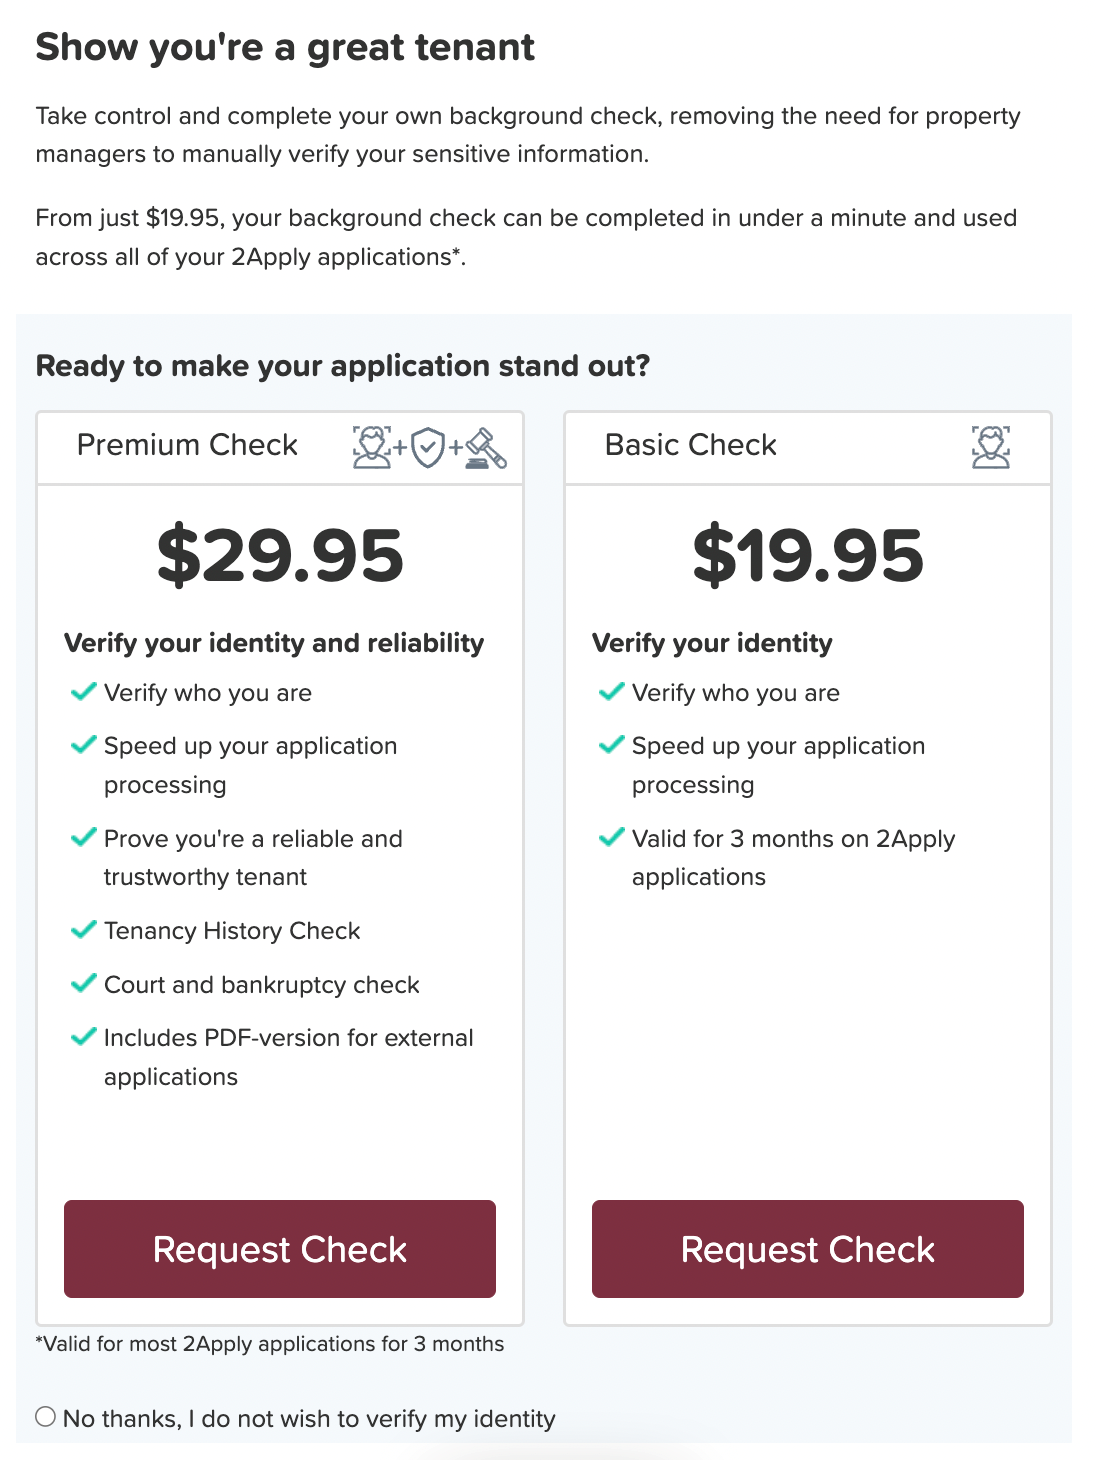 A screenshot of a rental application showing paid background check options.